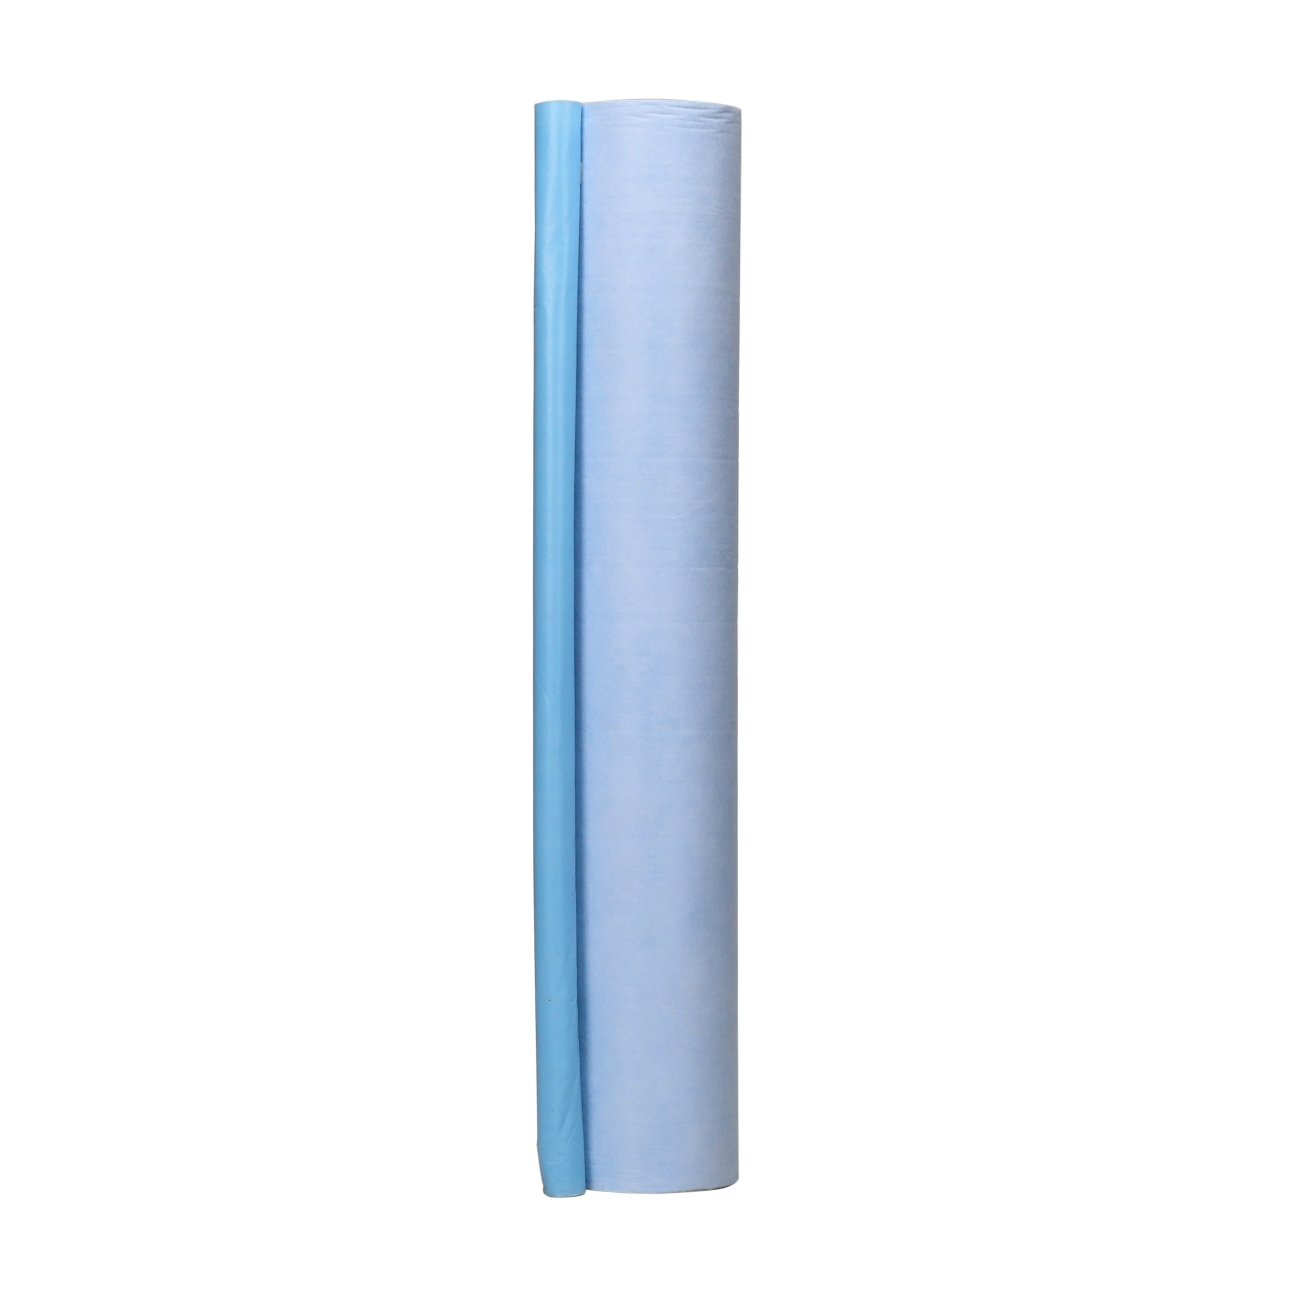 3M Self-adhesive fabric for protection against liquids, 1420 mm x 91.5 m, 36882